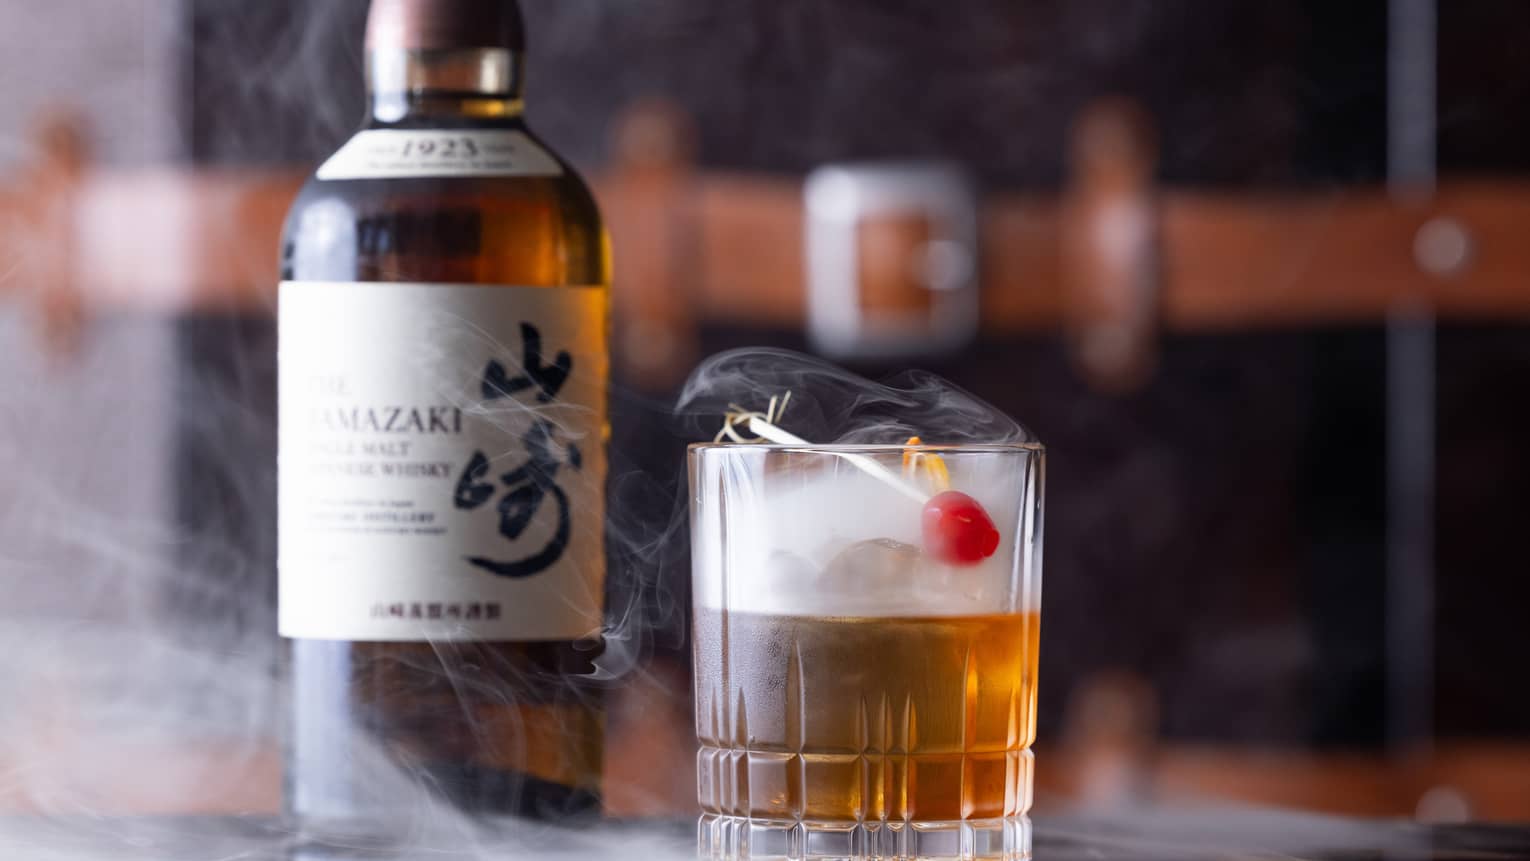 Bottle of Japanese whisky beside half-full cut-crystal glass with red cherry garnish, dry ice mist swirling from the glass.